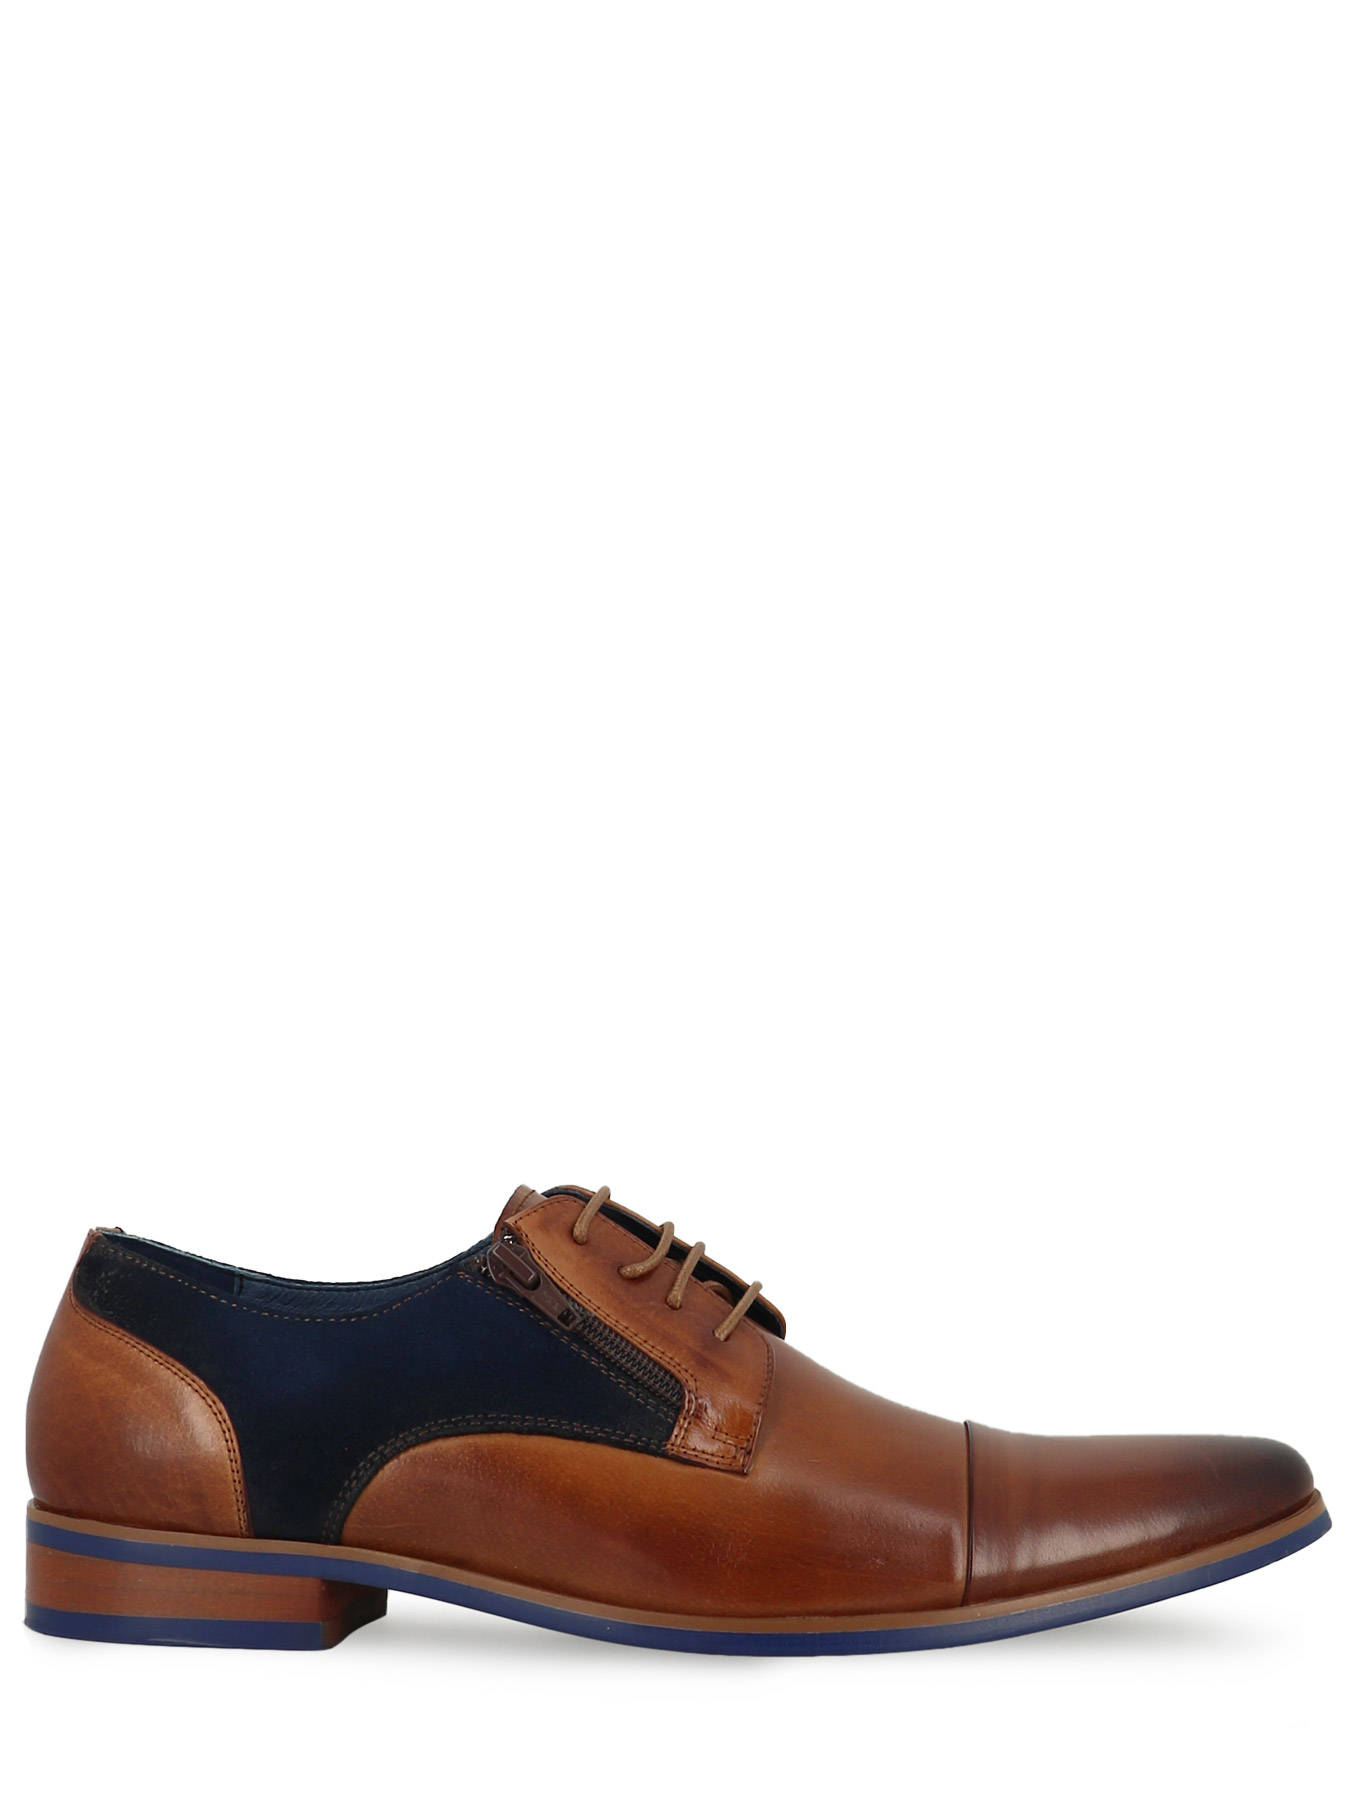 Kdopa Lace-up shoes SNOOP - best prices